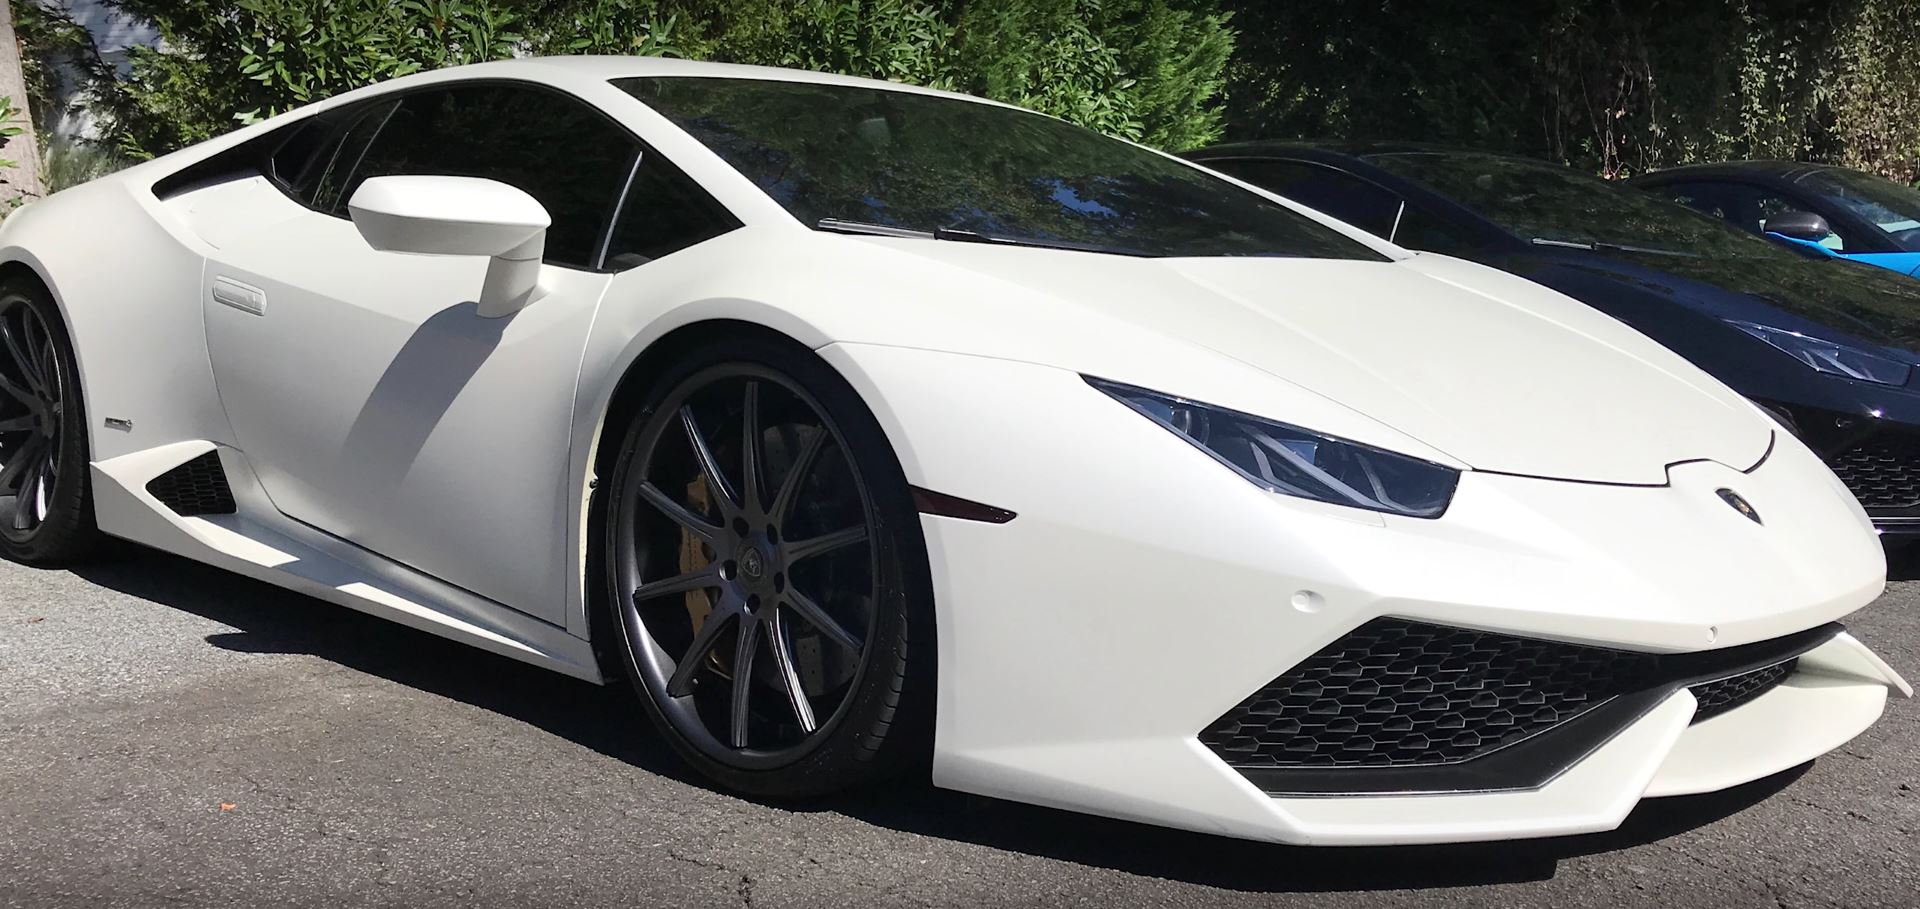 How to buy a lamborghini for cheap